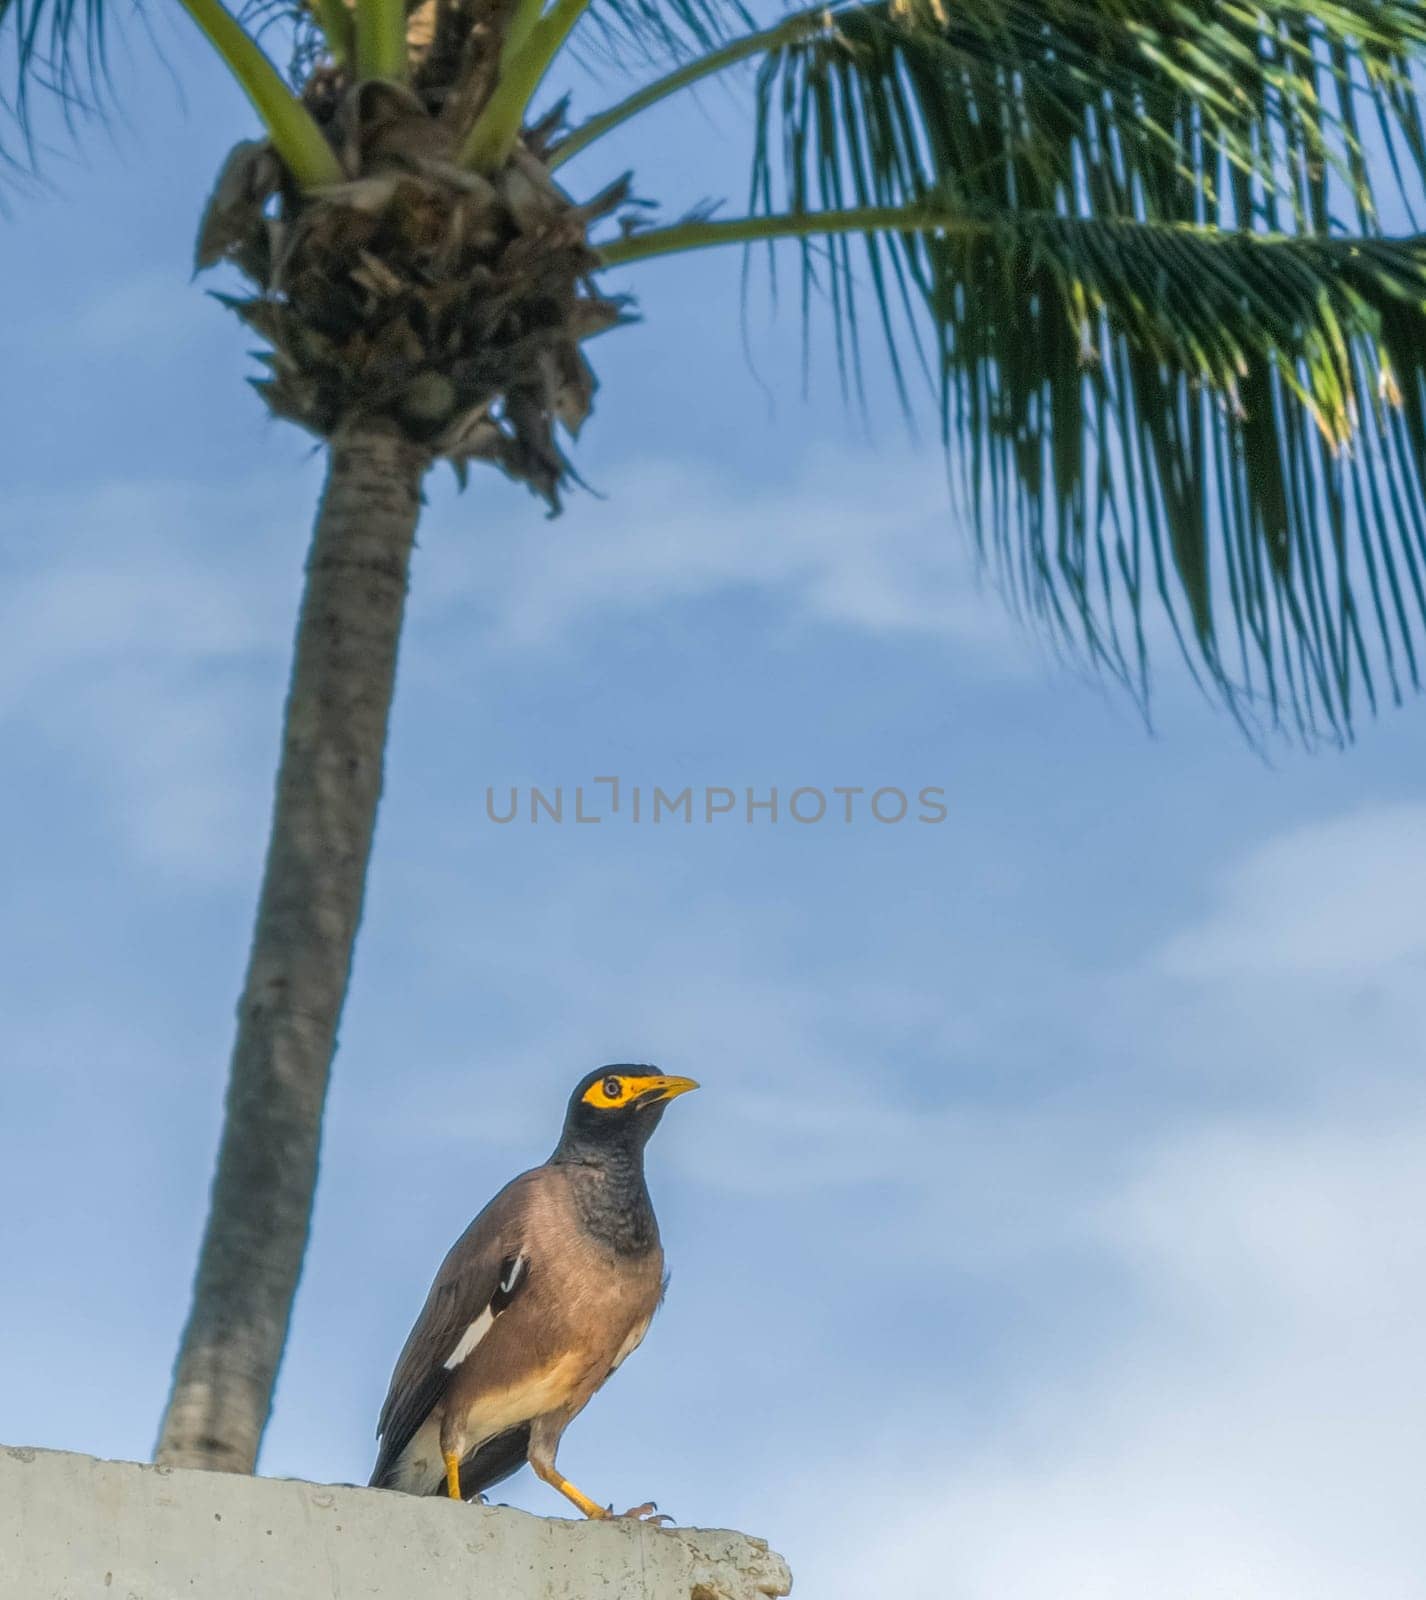 Common myna or Indian myna, Acridotheres tristis, in Phuket, Thailand by Elenaphotos21